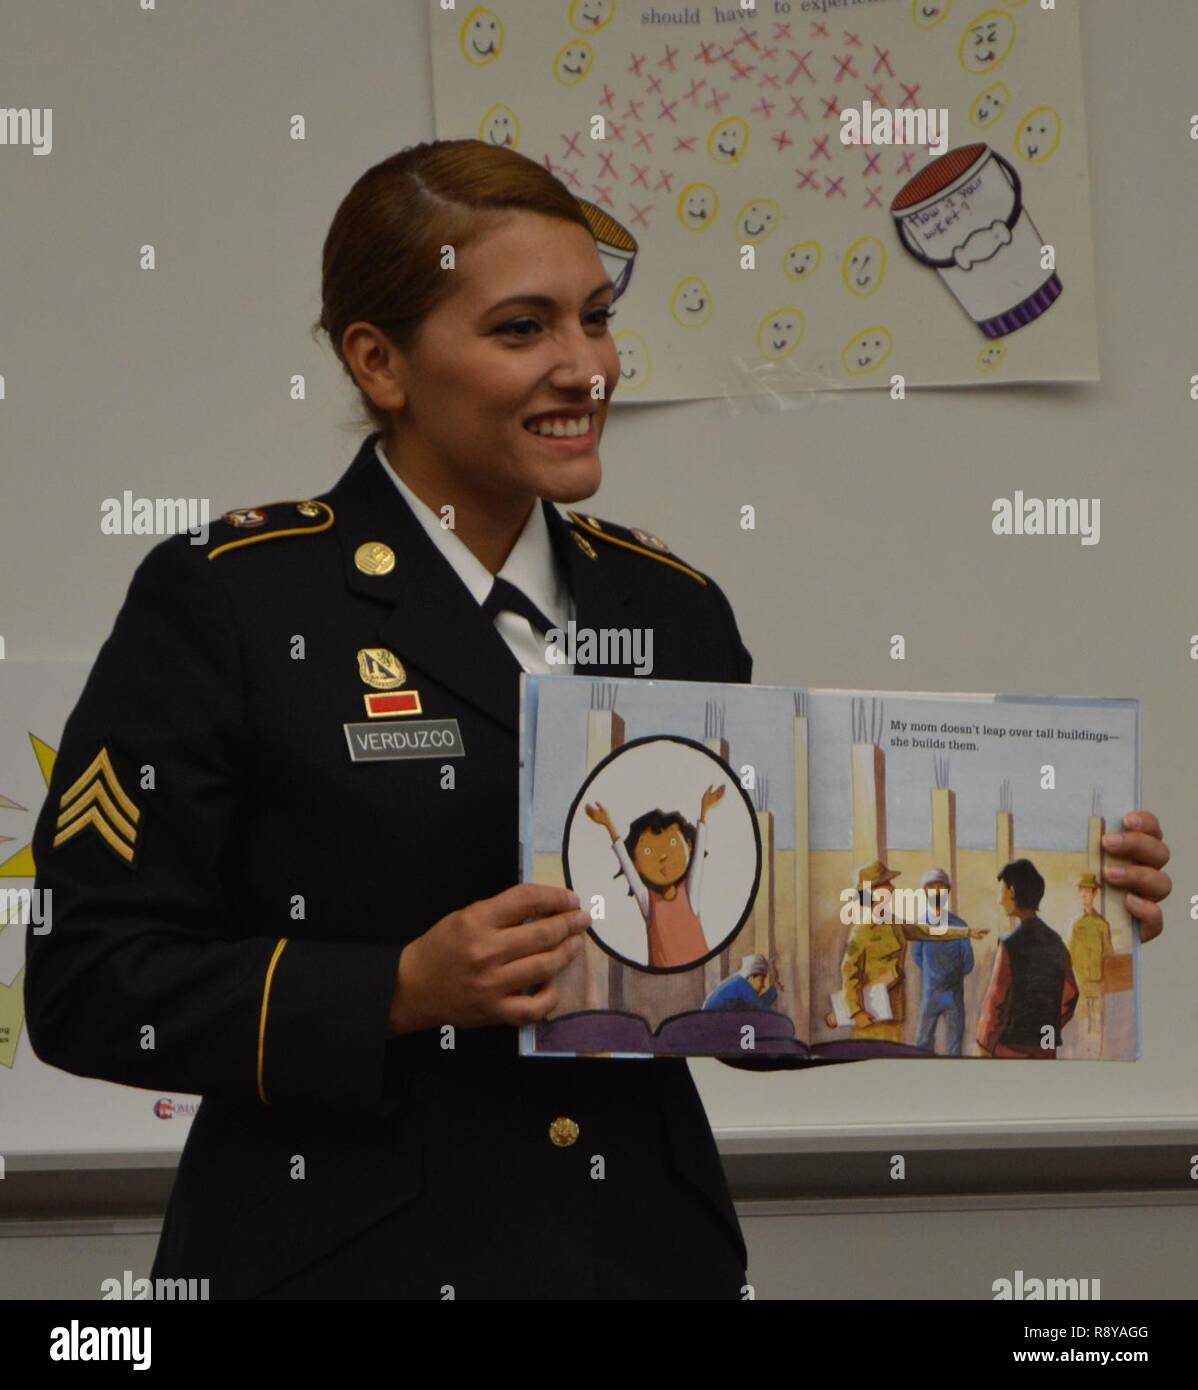 U.S. Army Reserve Sgt. Ana Verduzco with the 4th Sustainment Command (Expeditionary) reads “Hero Mom” to students at Kinder Ranch Elementary in San Antonio, TX, Mar. 10, 2017. Stock Photo